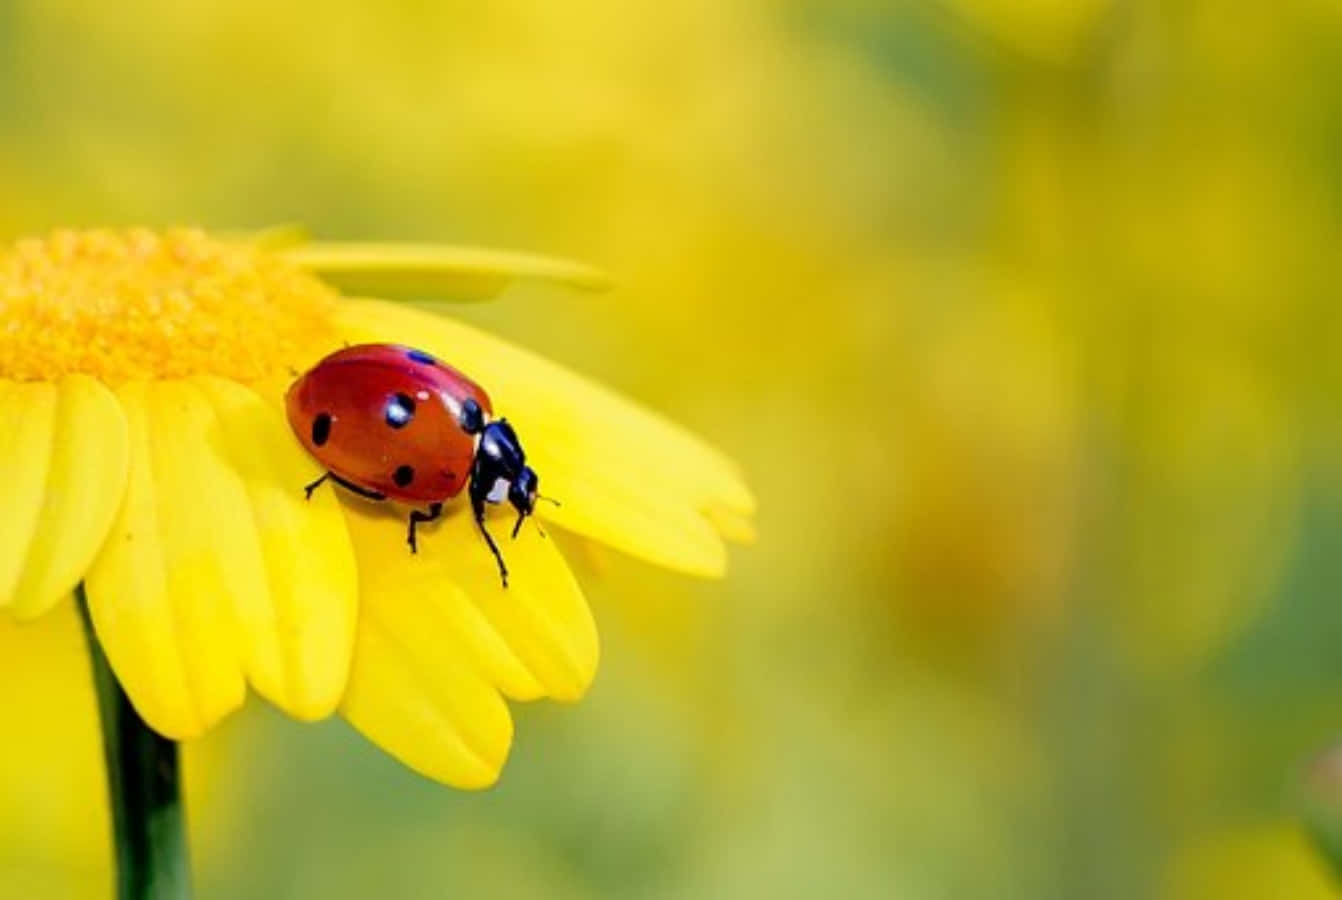 Cute Ladybug Pictures 1342 X 900 Picture